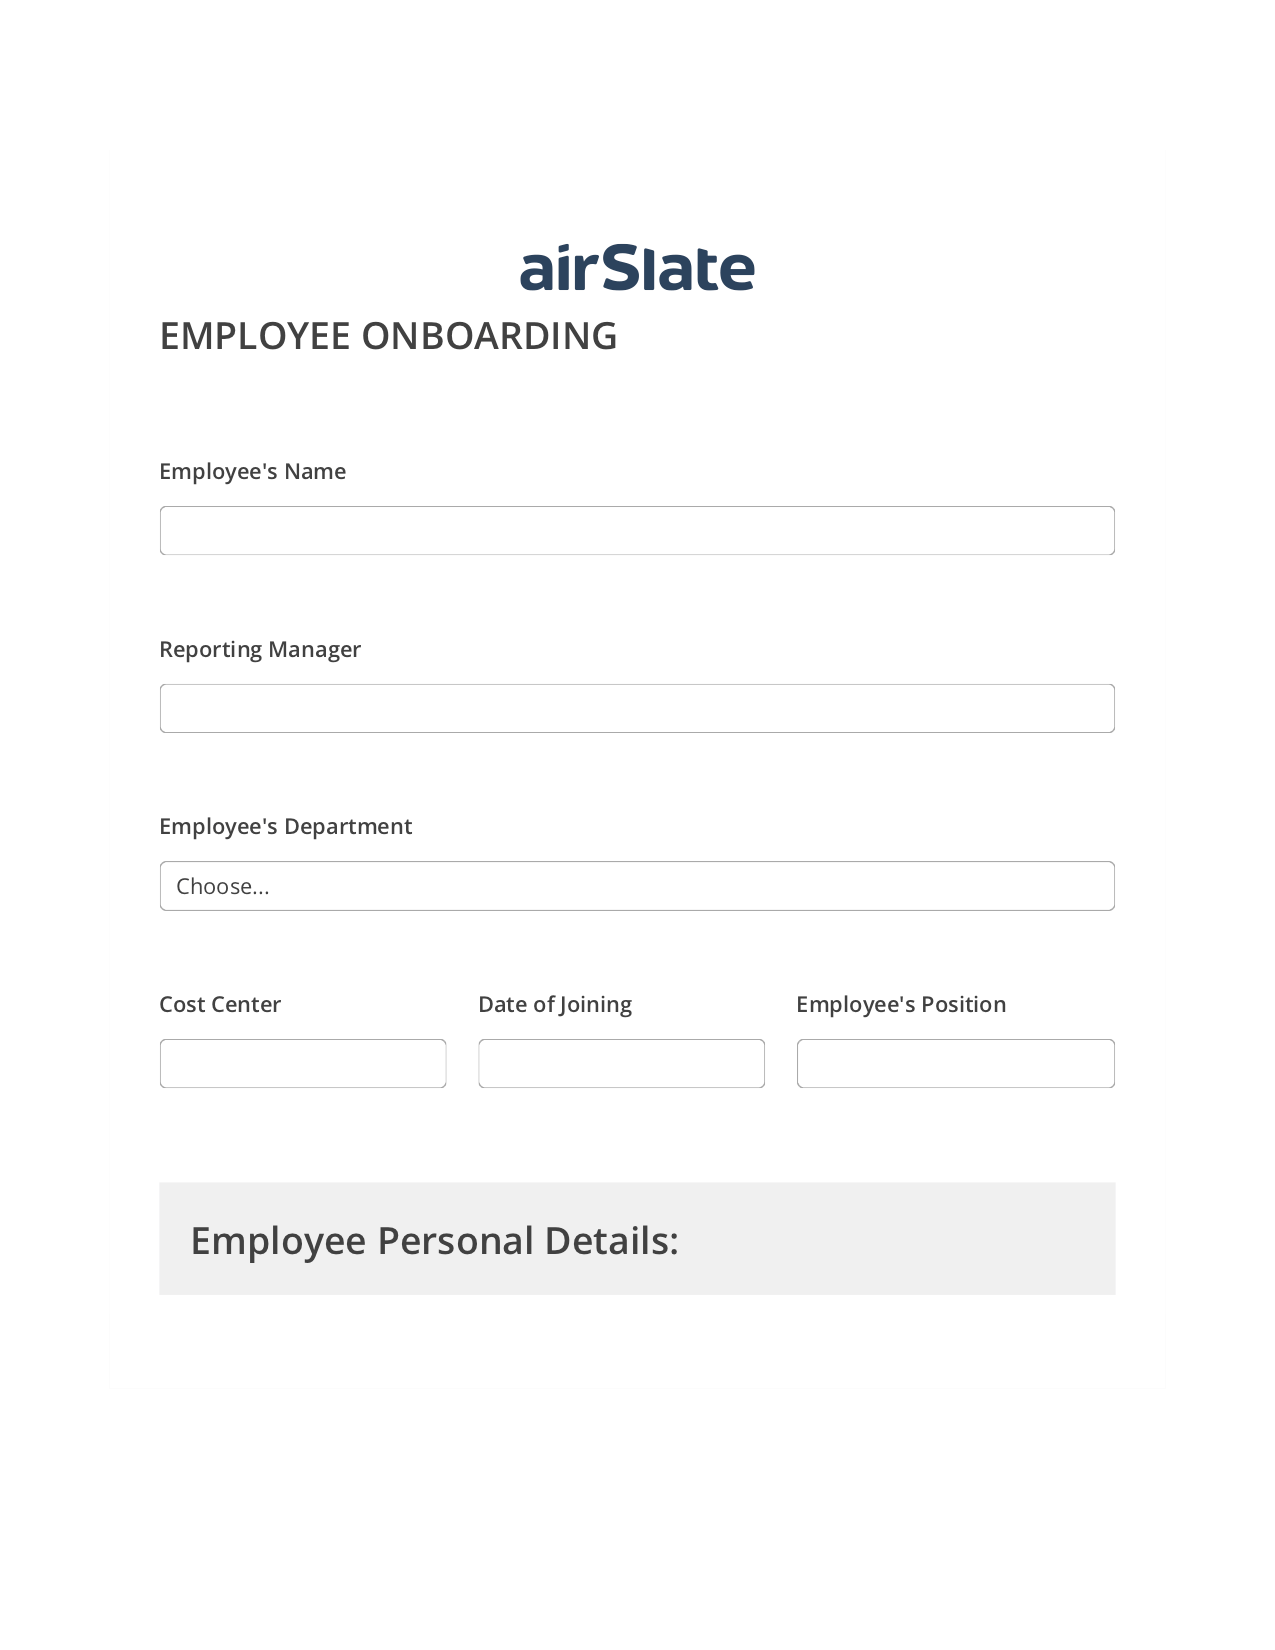 Employee Onboarding Workflow Pre-fill Dropdown from Airtable, System Bot - Create a Slate in another Flow, Export to Excel 365 Bot